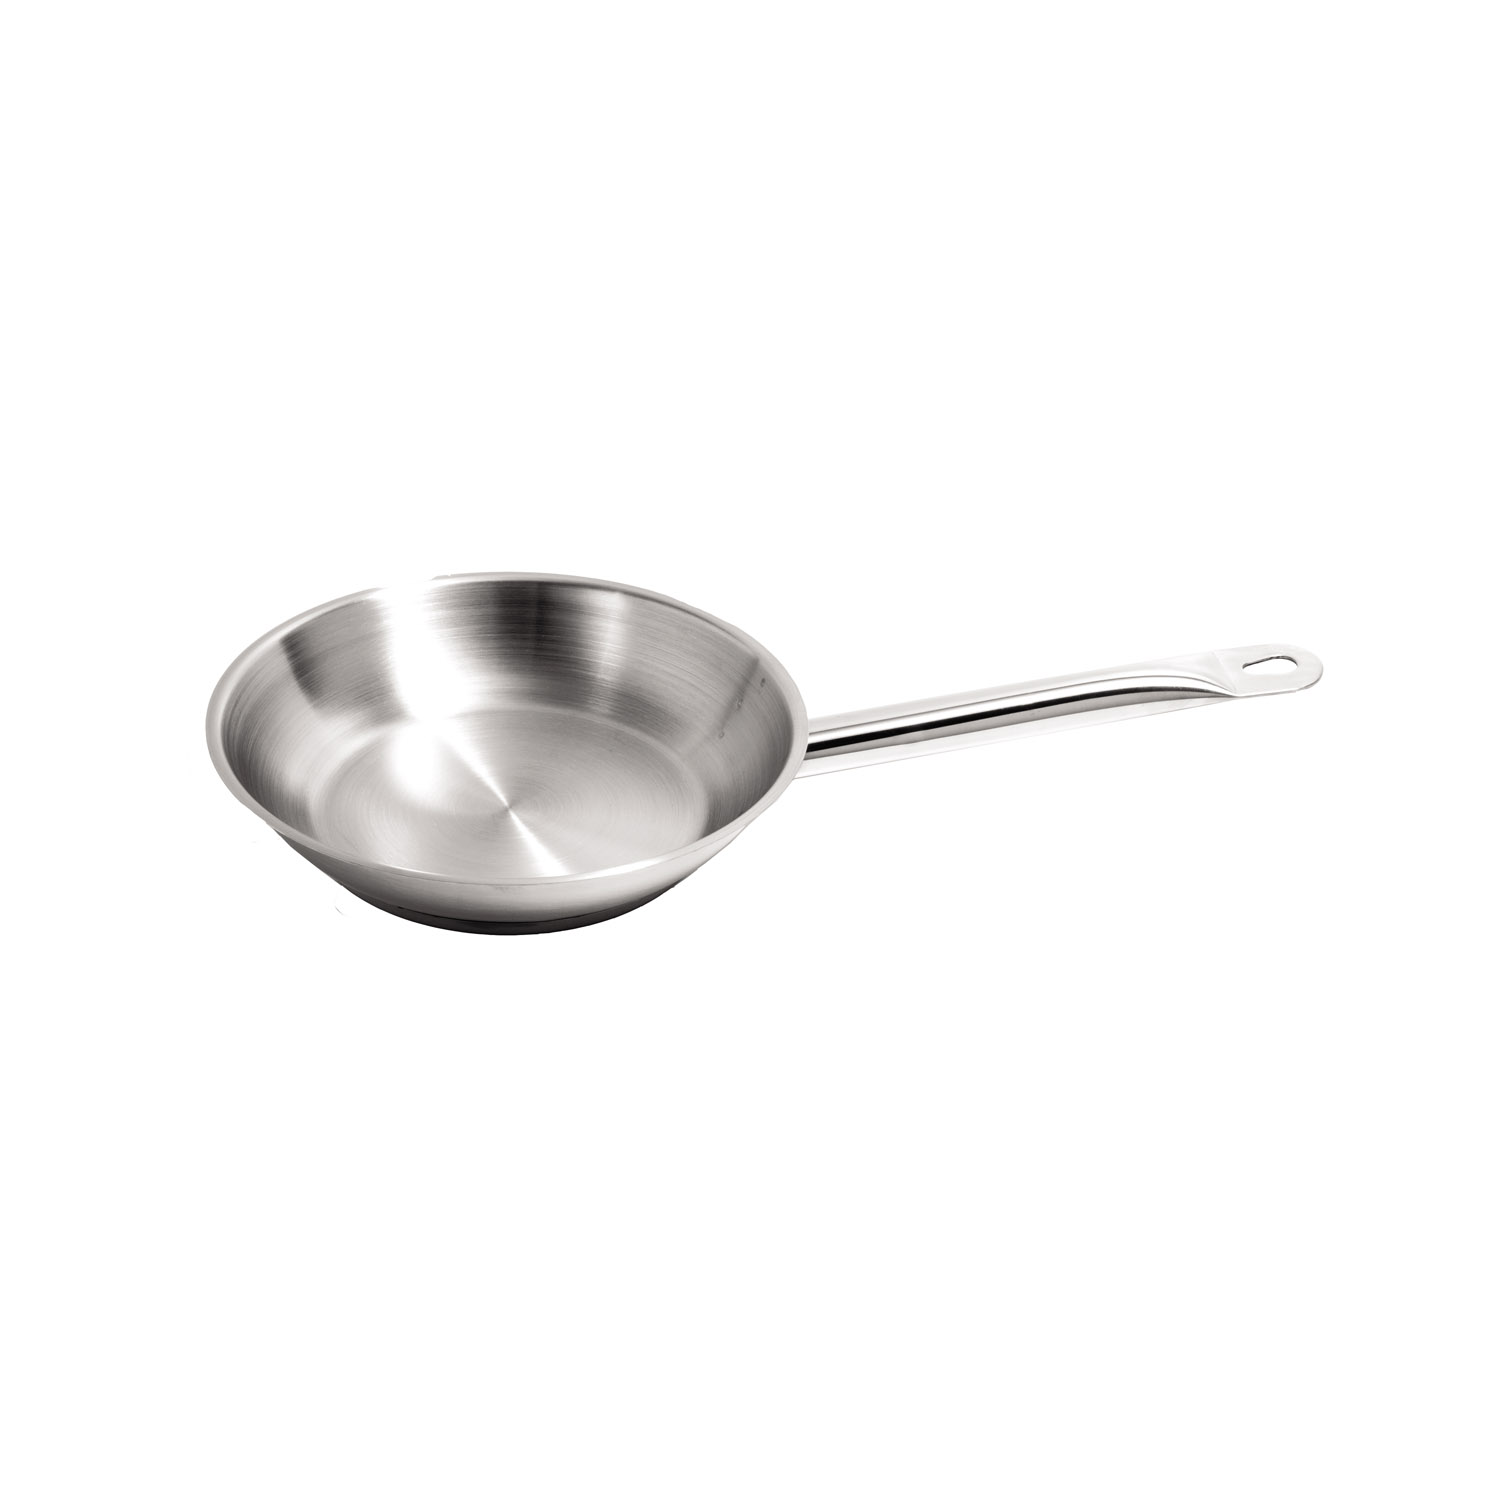 CAC China S1FP-8 Stainless Steel Fry Pan 8"